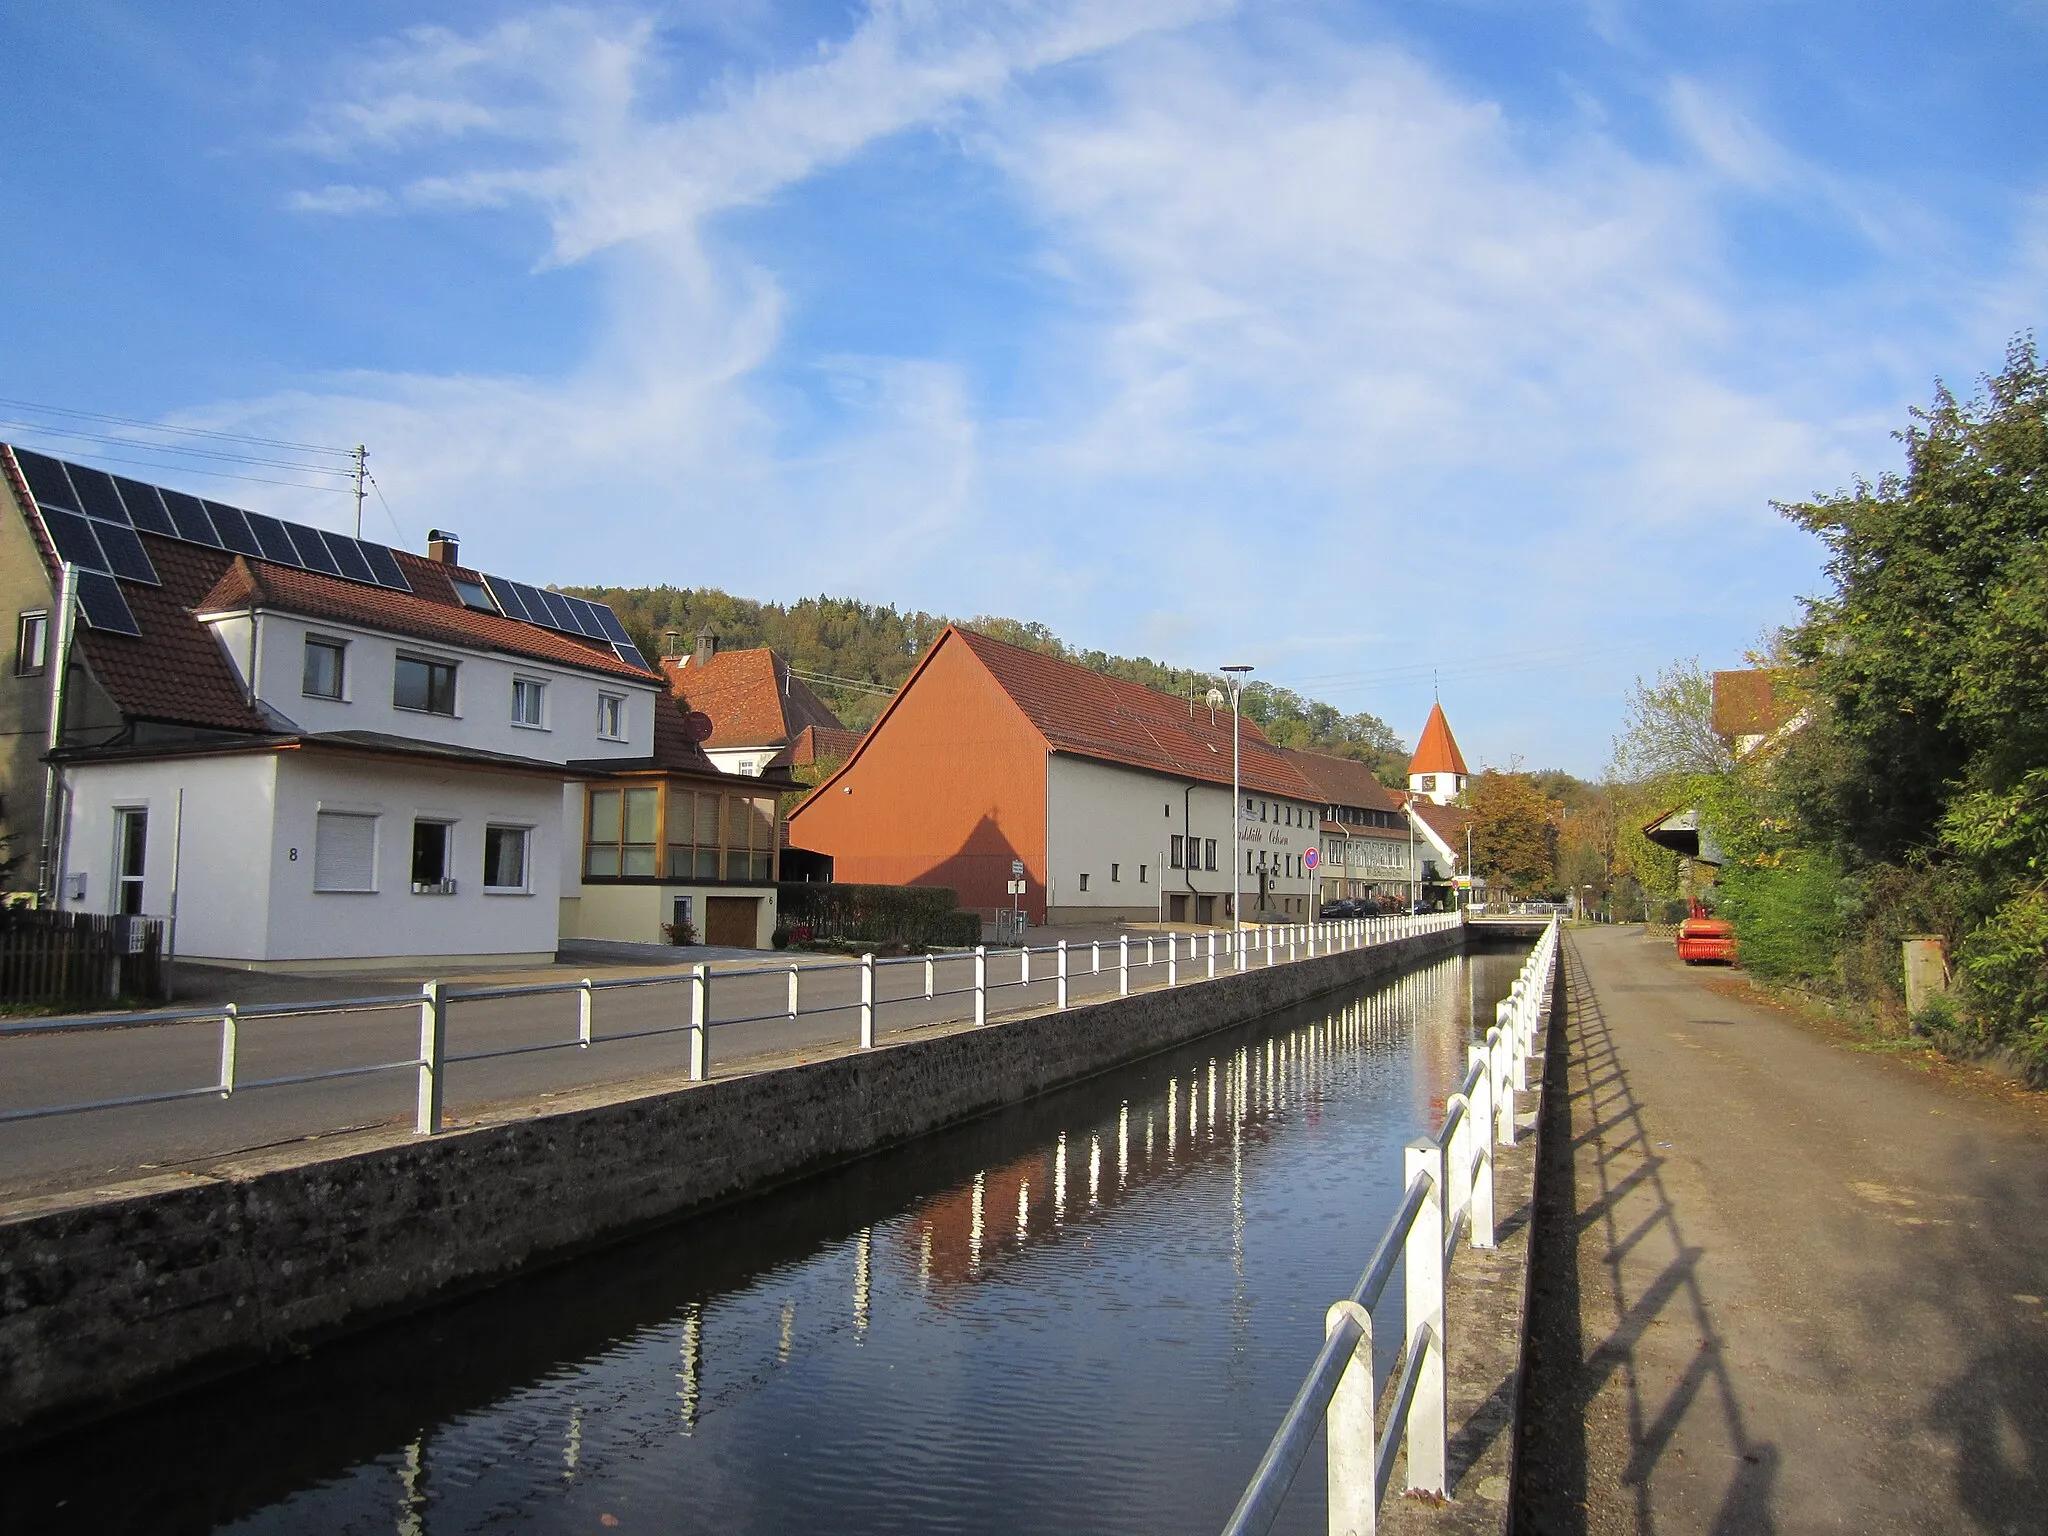 Photo showing: Center of village Fornsbach, suburb of Murrhardt, with the Fornsbach river.